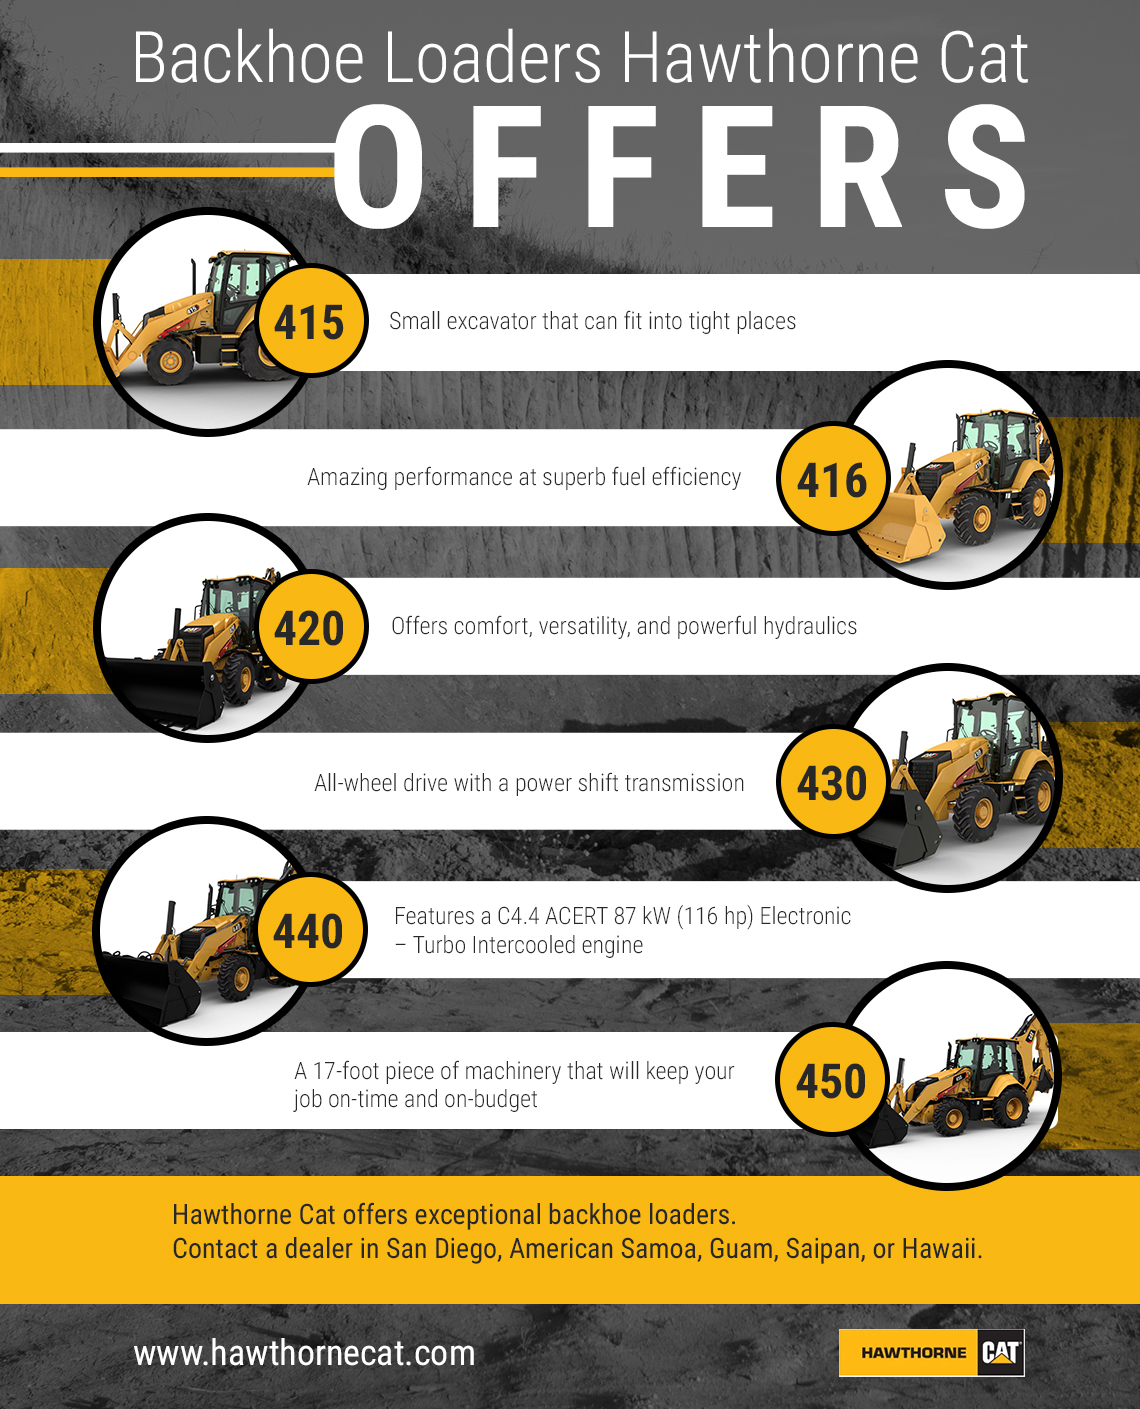 Infographic - Backhoe Loaders Hawthorne Cat Offers